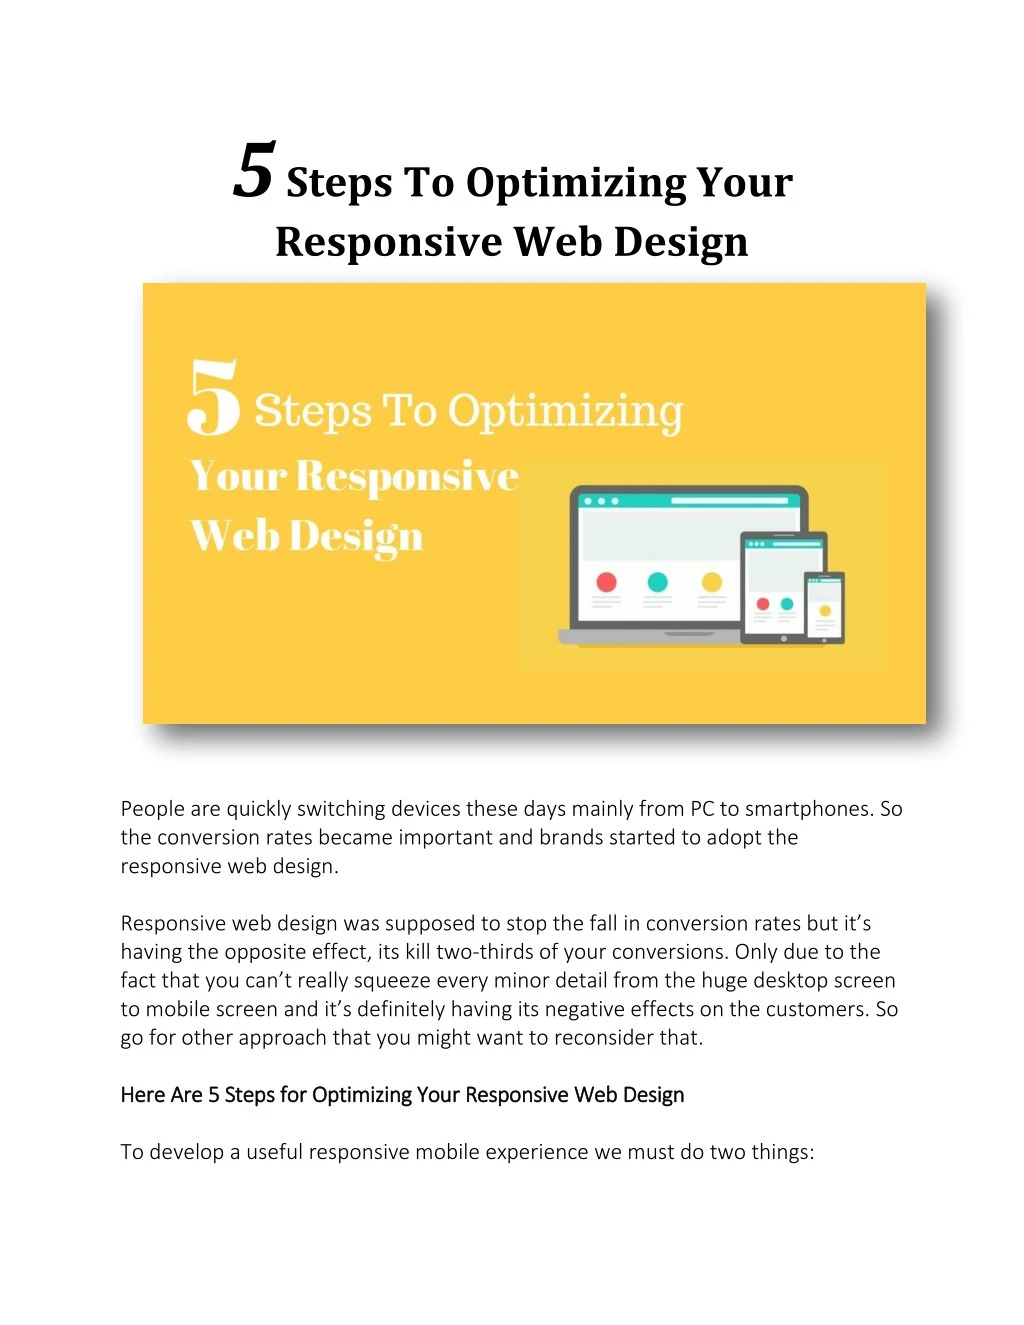 5 steps to optimizing your responsive web design